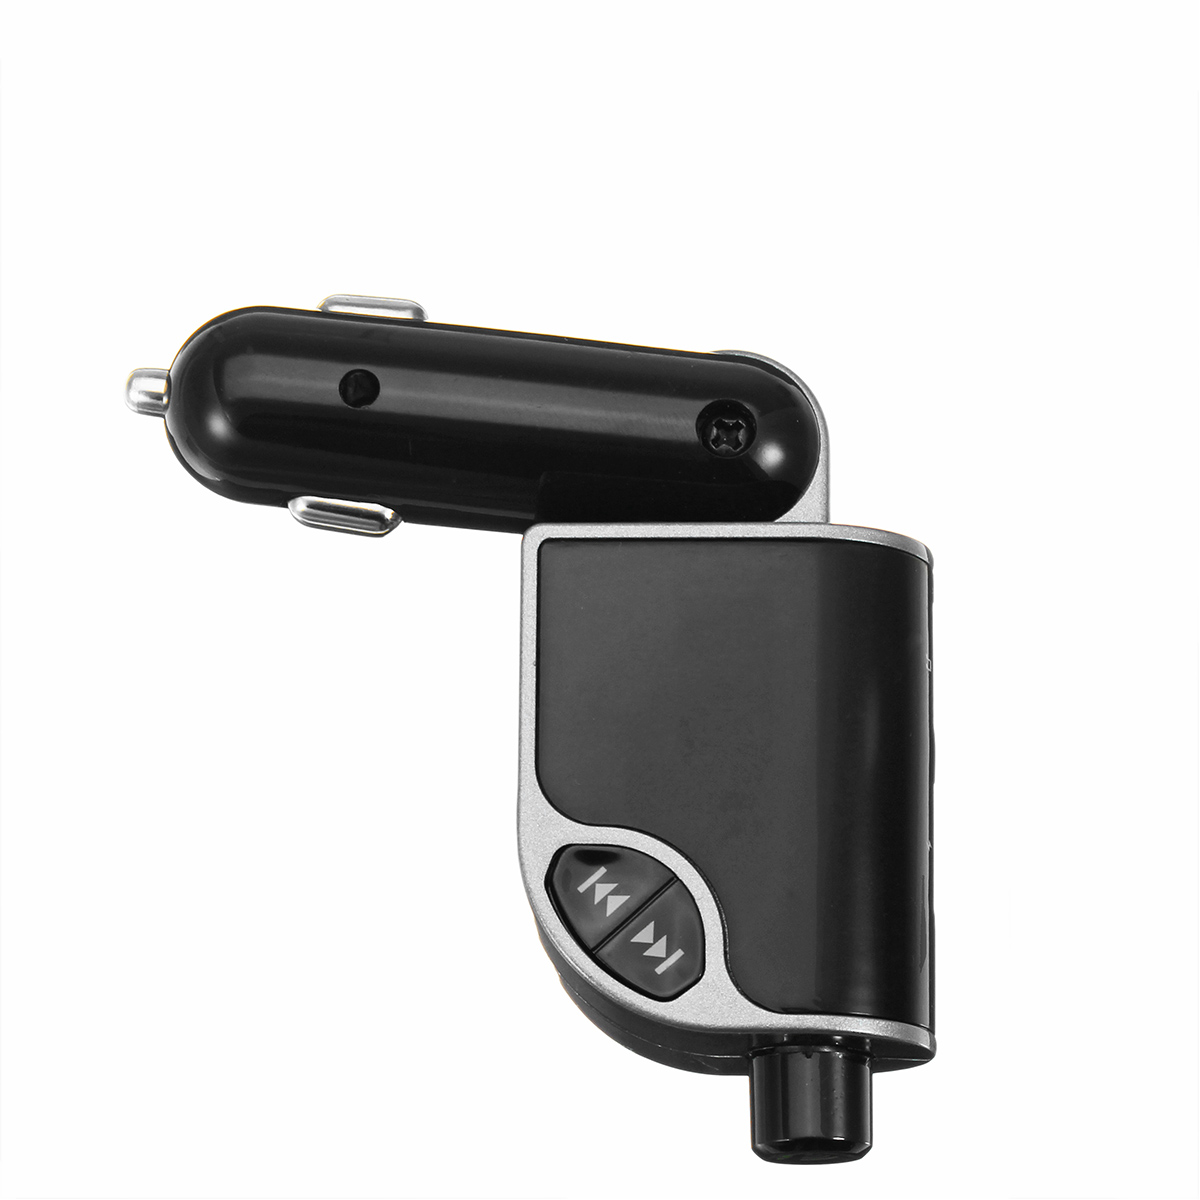 Bluetooth Car FM Transmitter USB Charger Car MP3 Player Support USB SD TF Card Wireless Hands Free